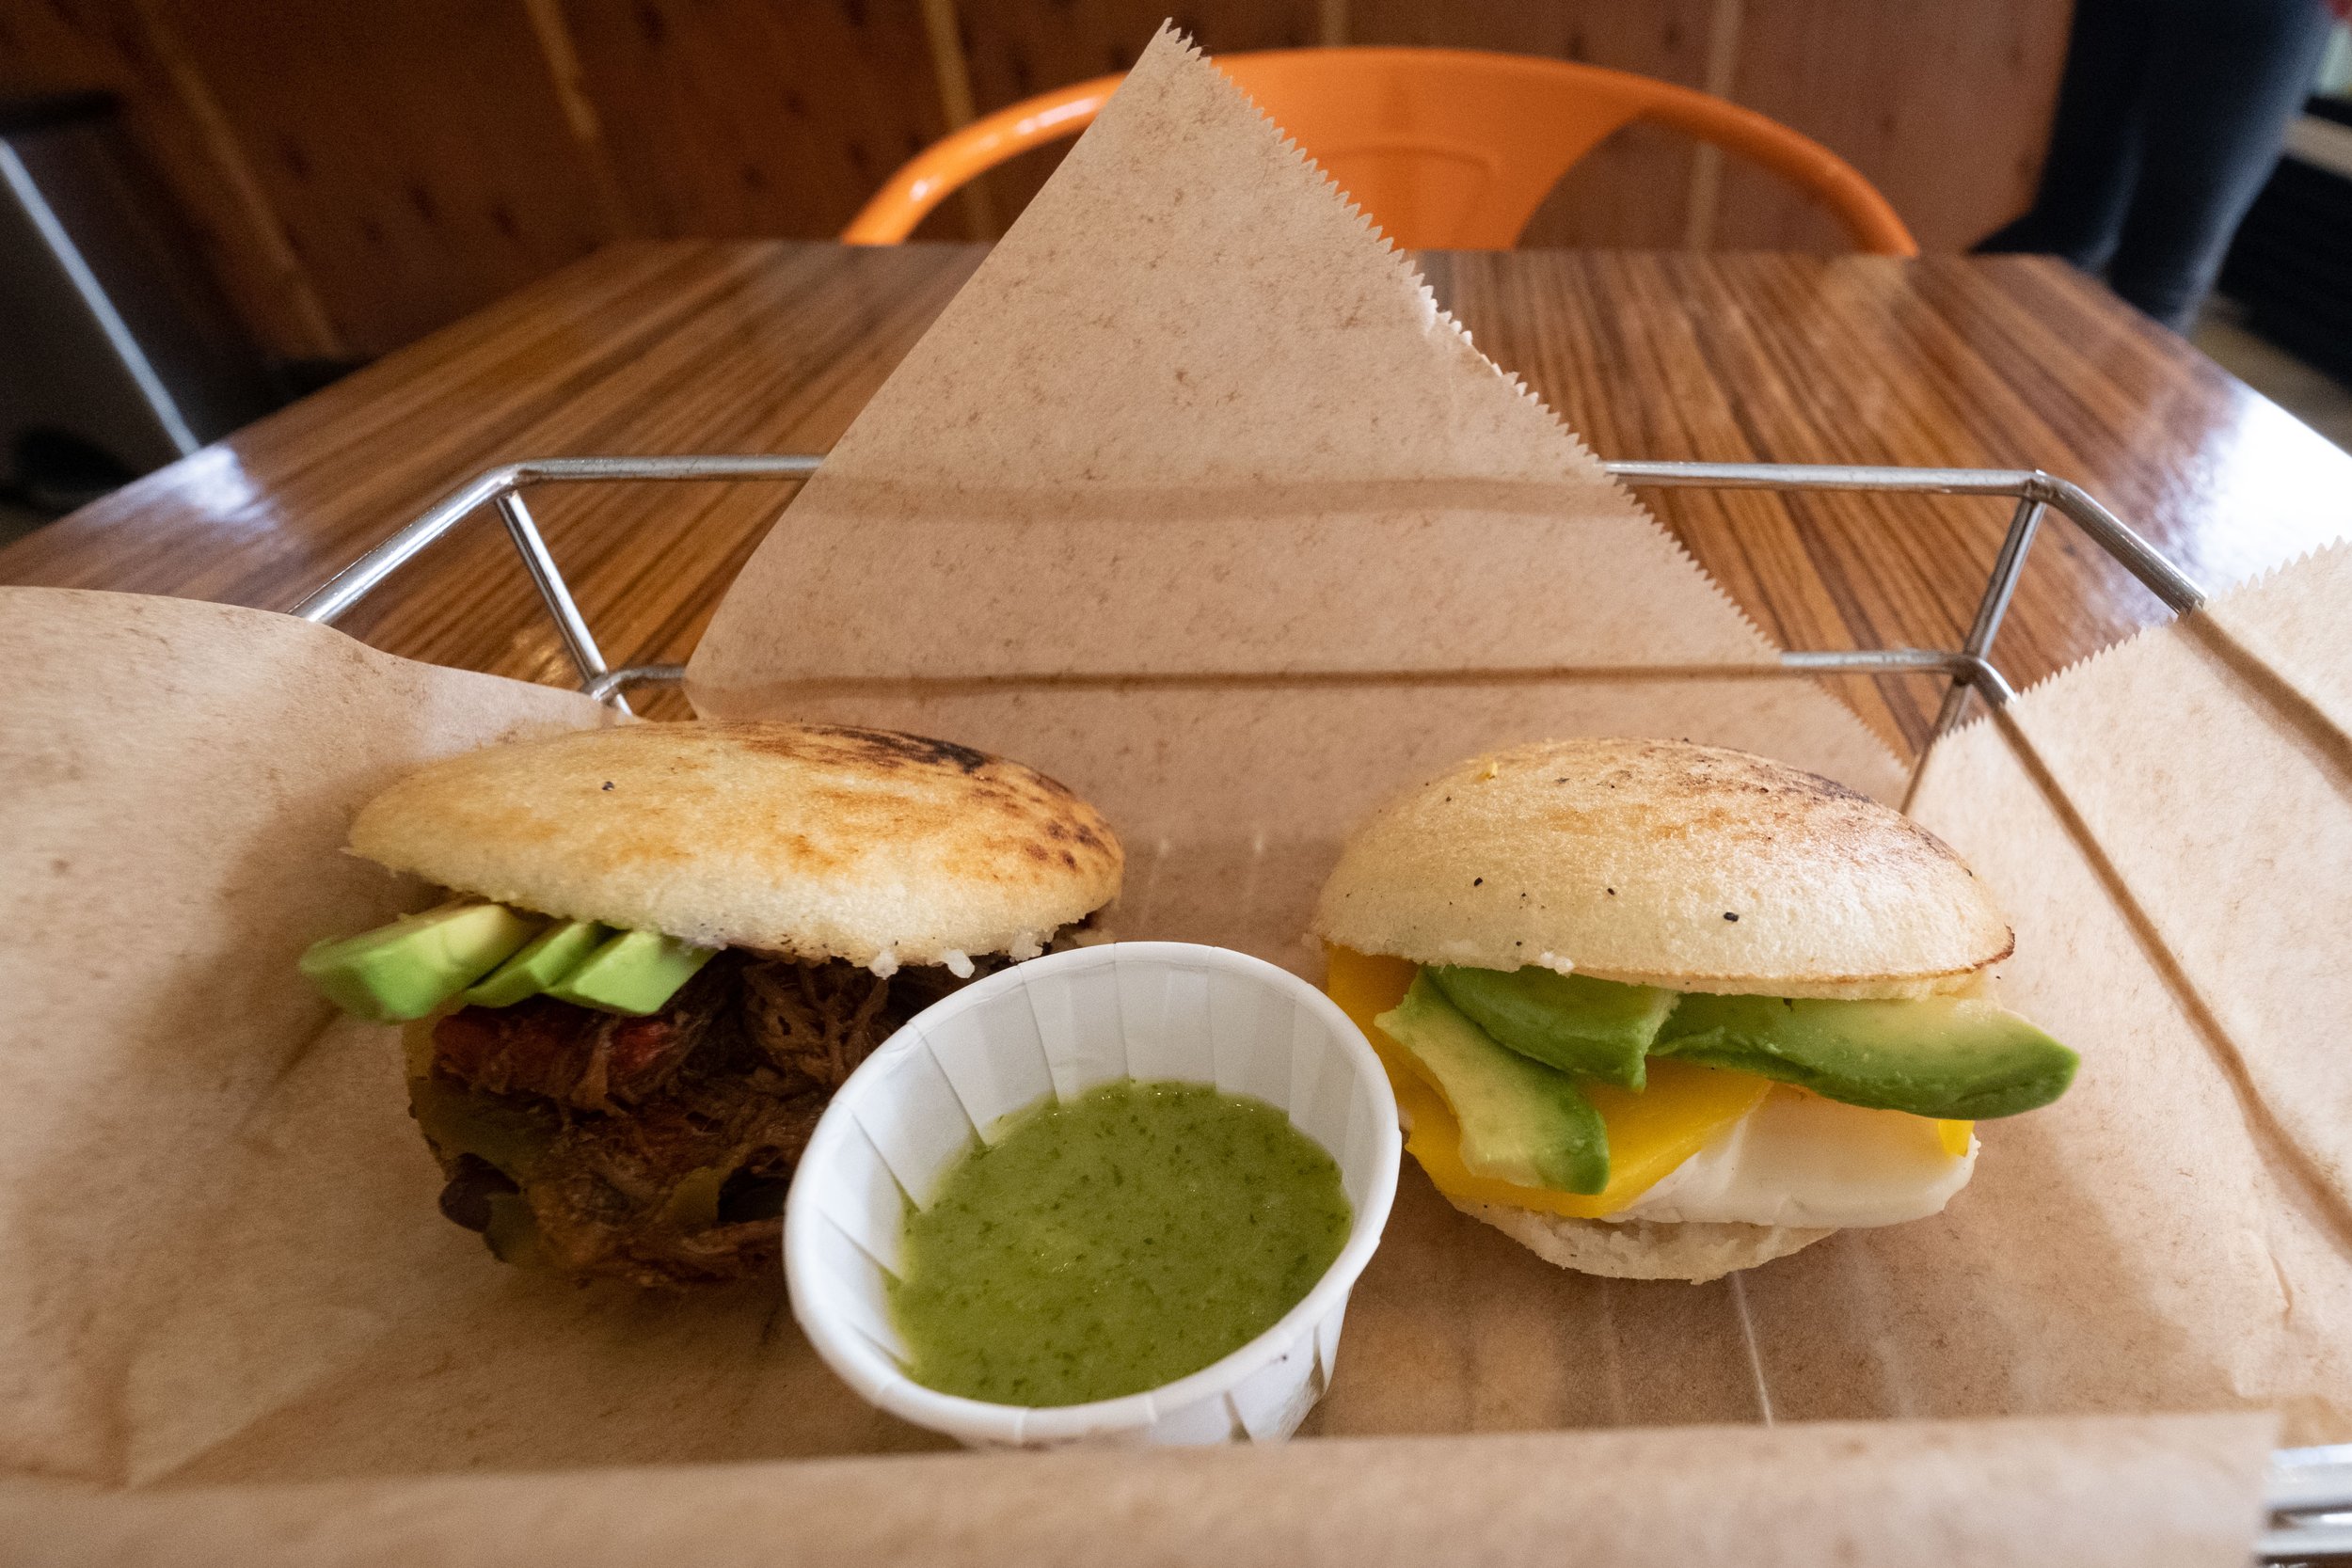  Shown here are Arepas, a Nicaraguan sandwich made to order with a cornmeal dough cut open for a flank steak filling (L) and mango, avocado and cheese (R), served with a chimichurri sauce. Bolivar Cafe is located on Ocean Park Blvd. and 18th St. In a